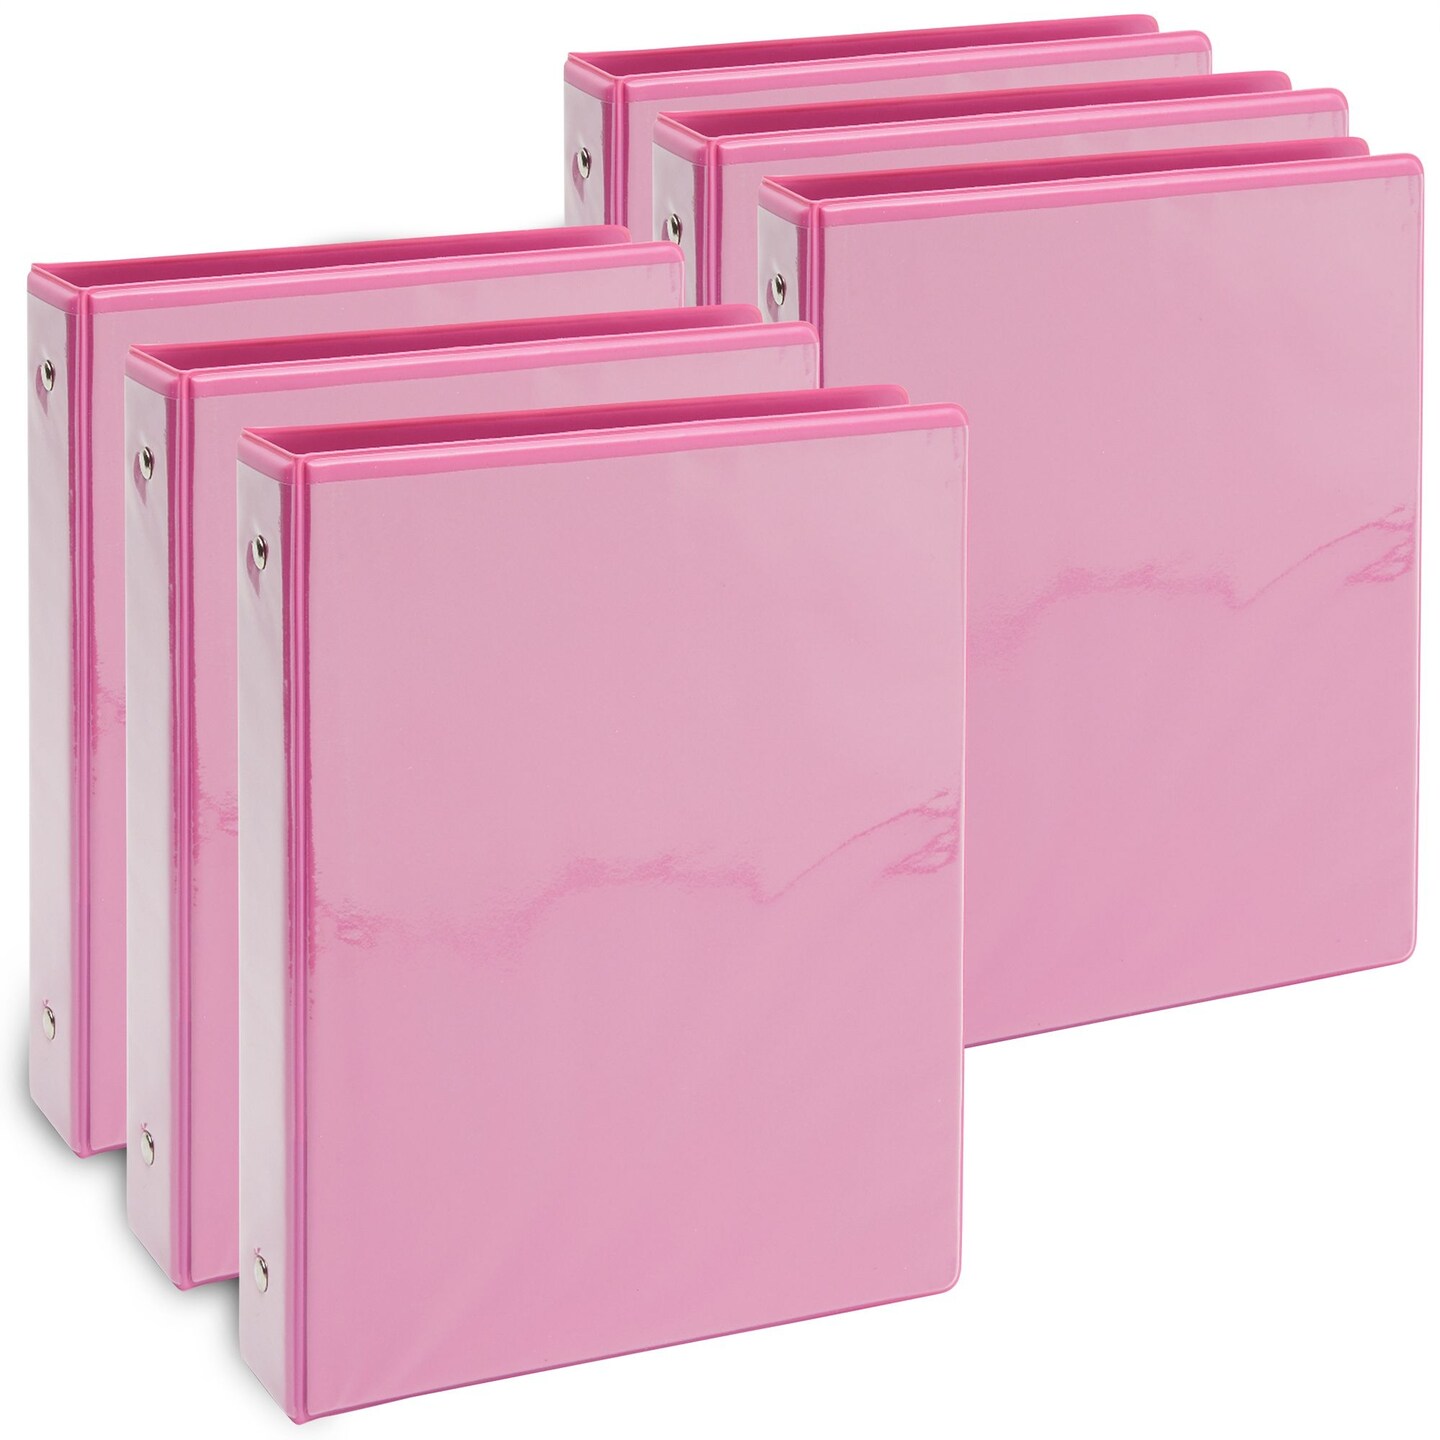 Elmer's Compact 3-Ring Binder/Punch/Ruler on sale at  $3.98